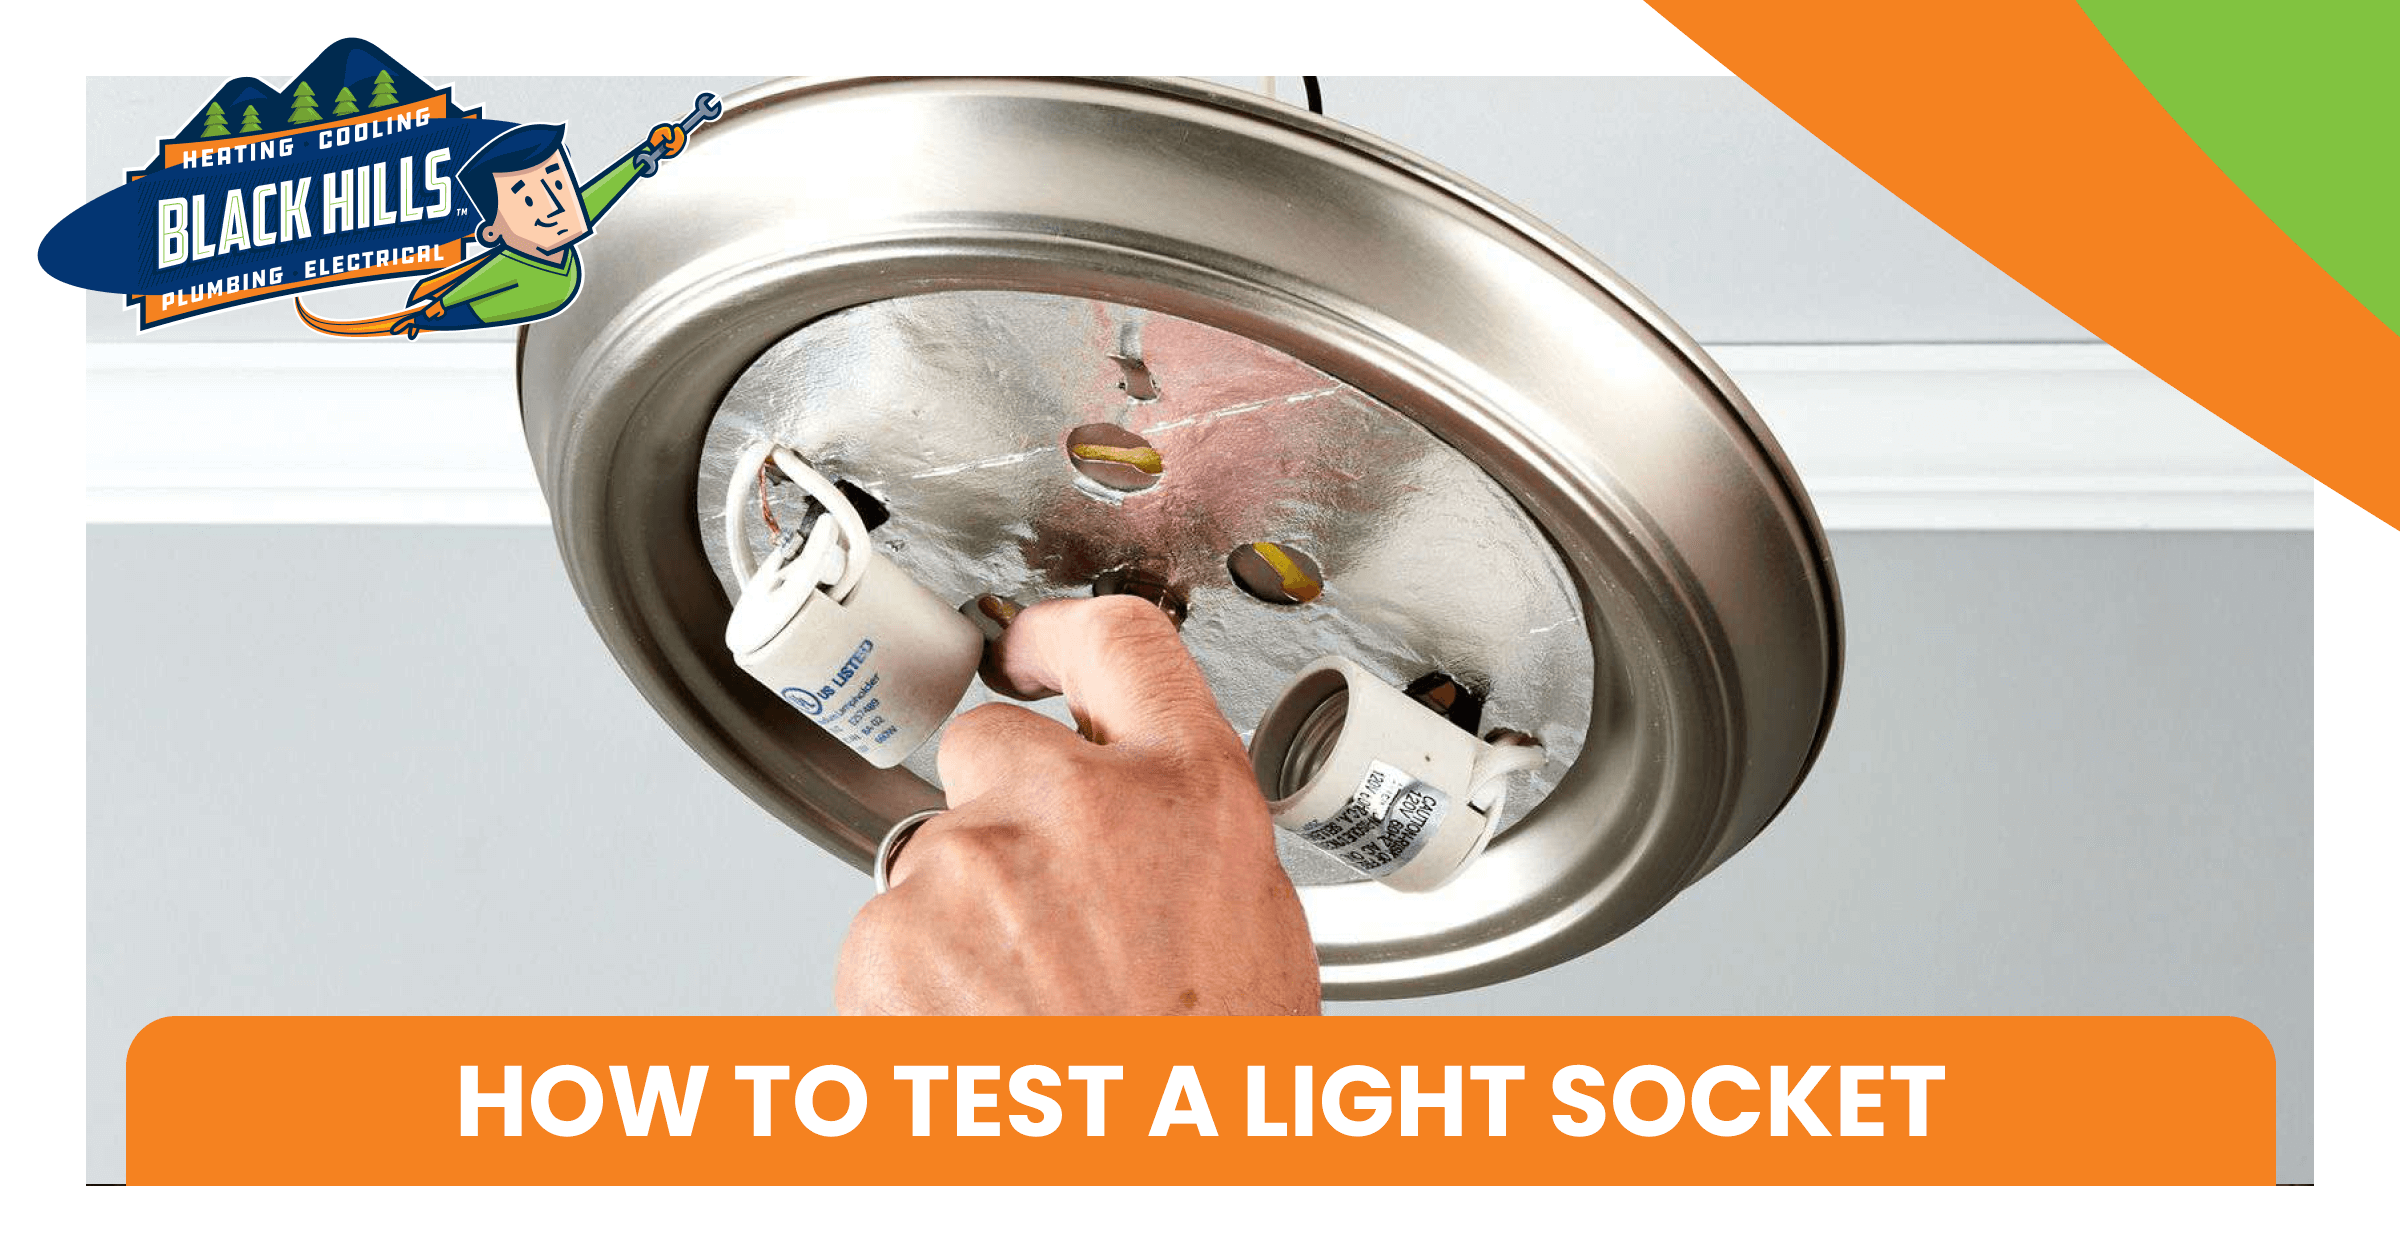 How To Test Light Socket With Multimeter How to Test a Light Socket - BlackHills Inc.